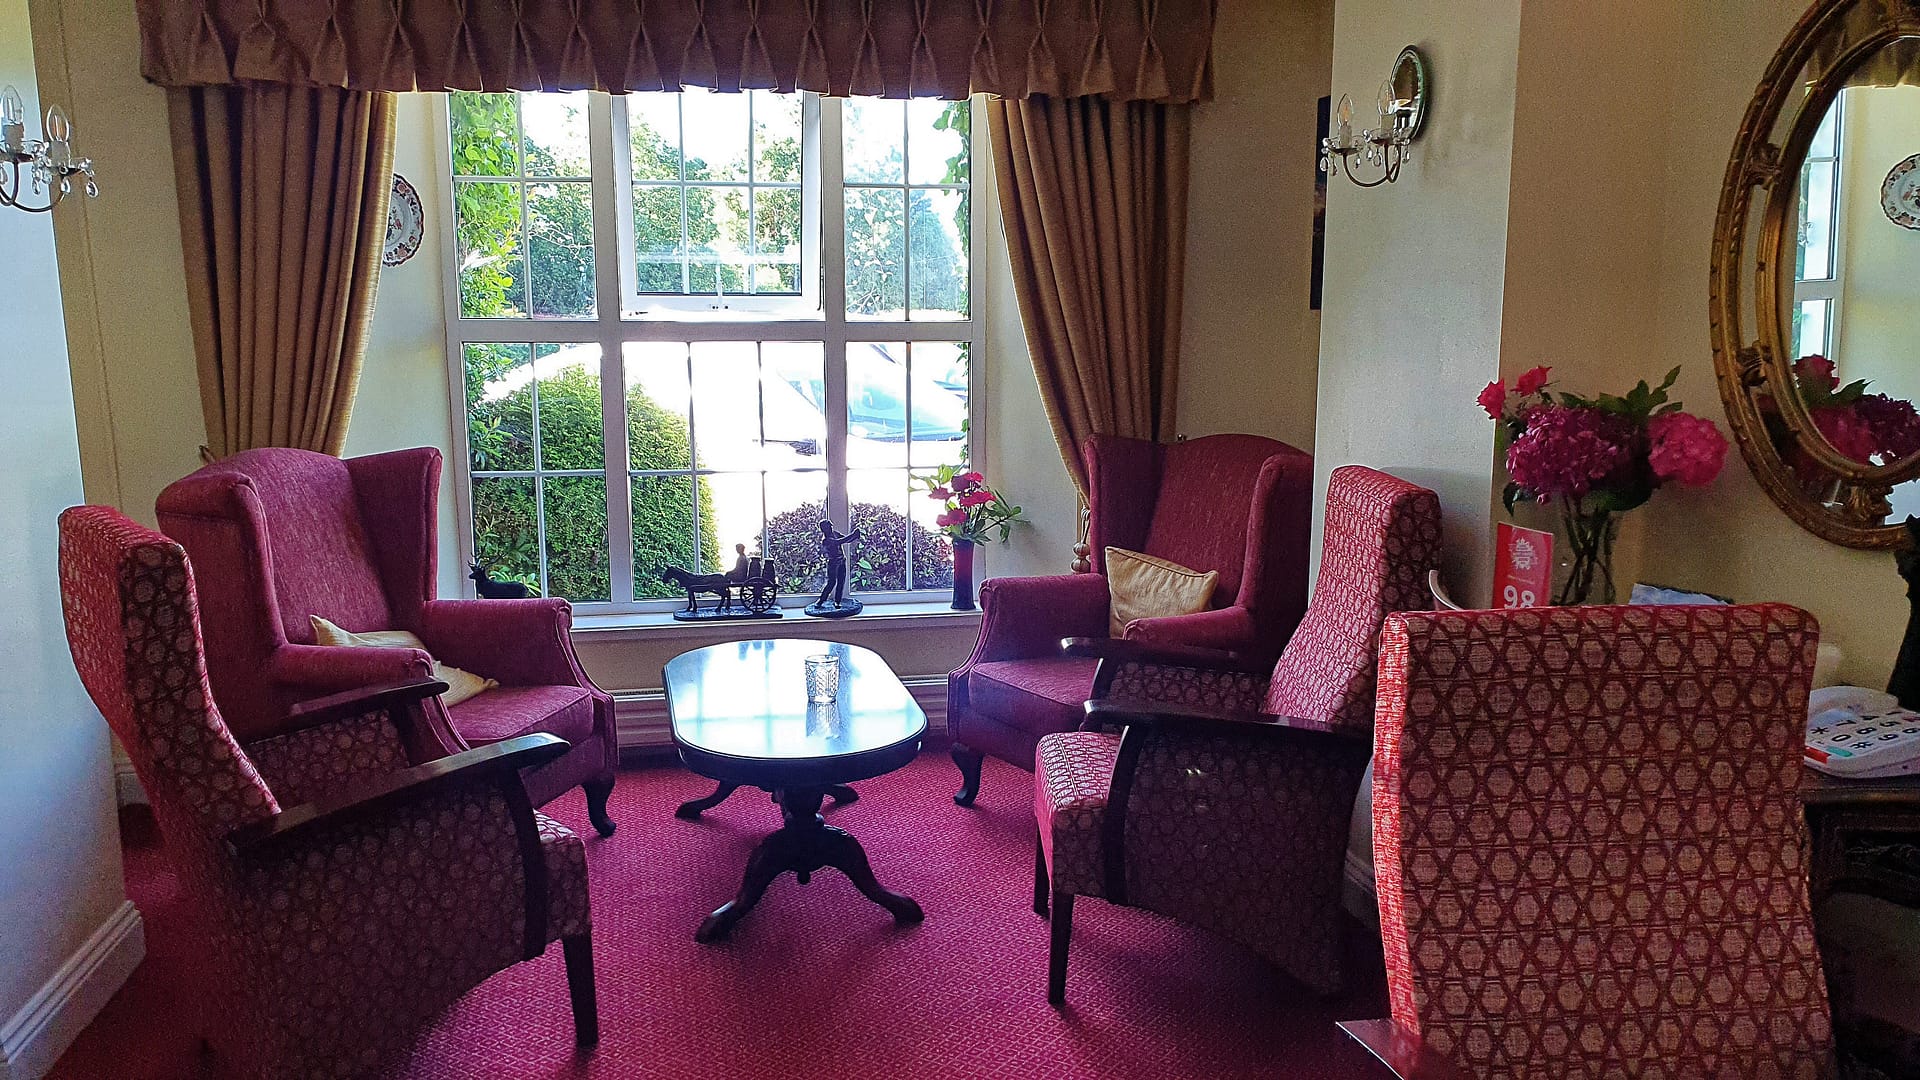 This picture shows the warm and welcoming sitting room.